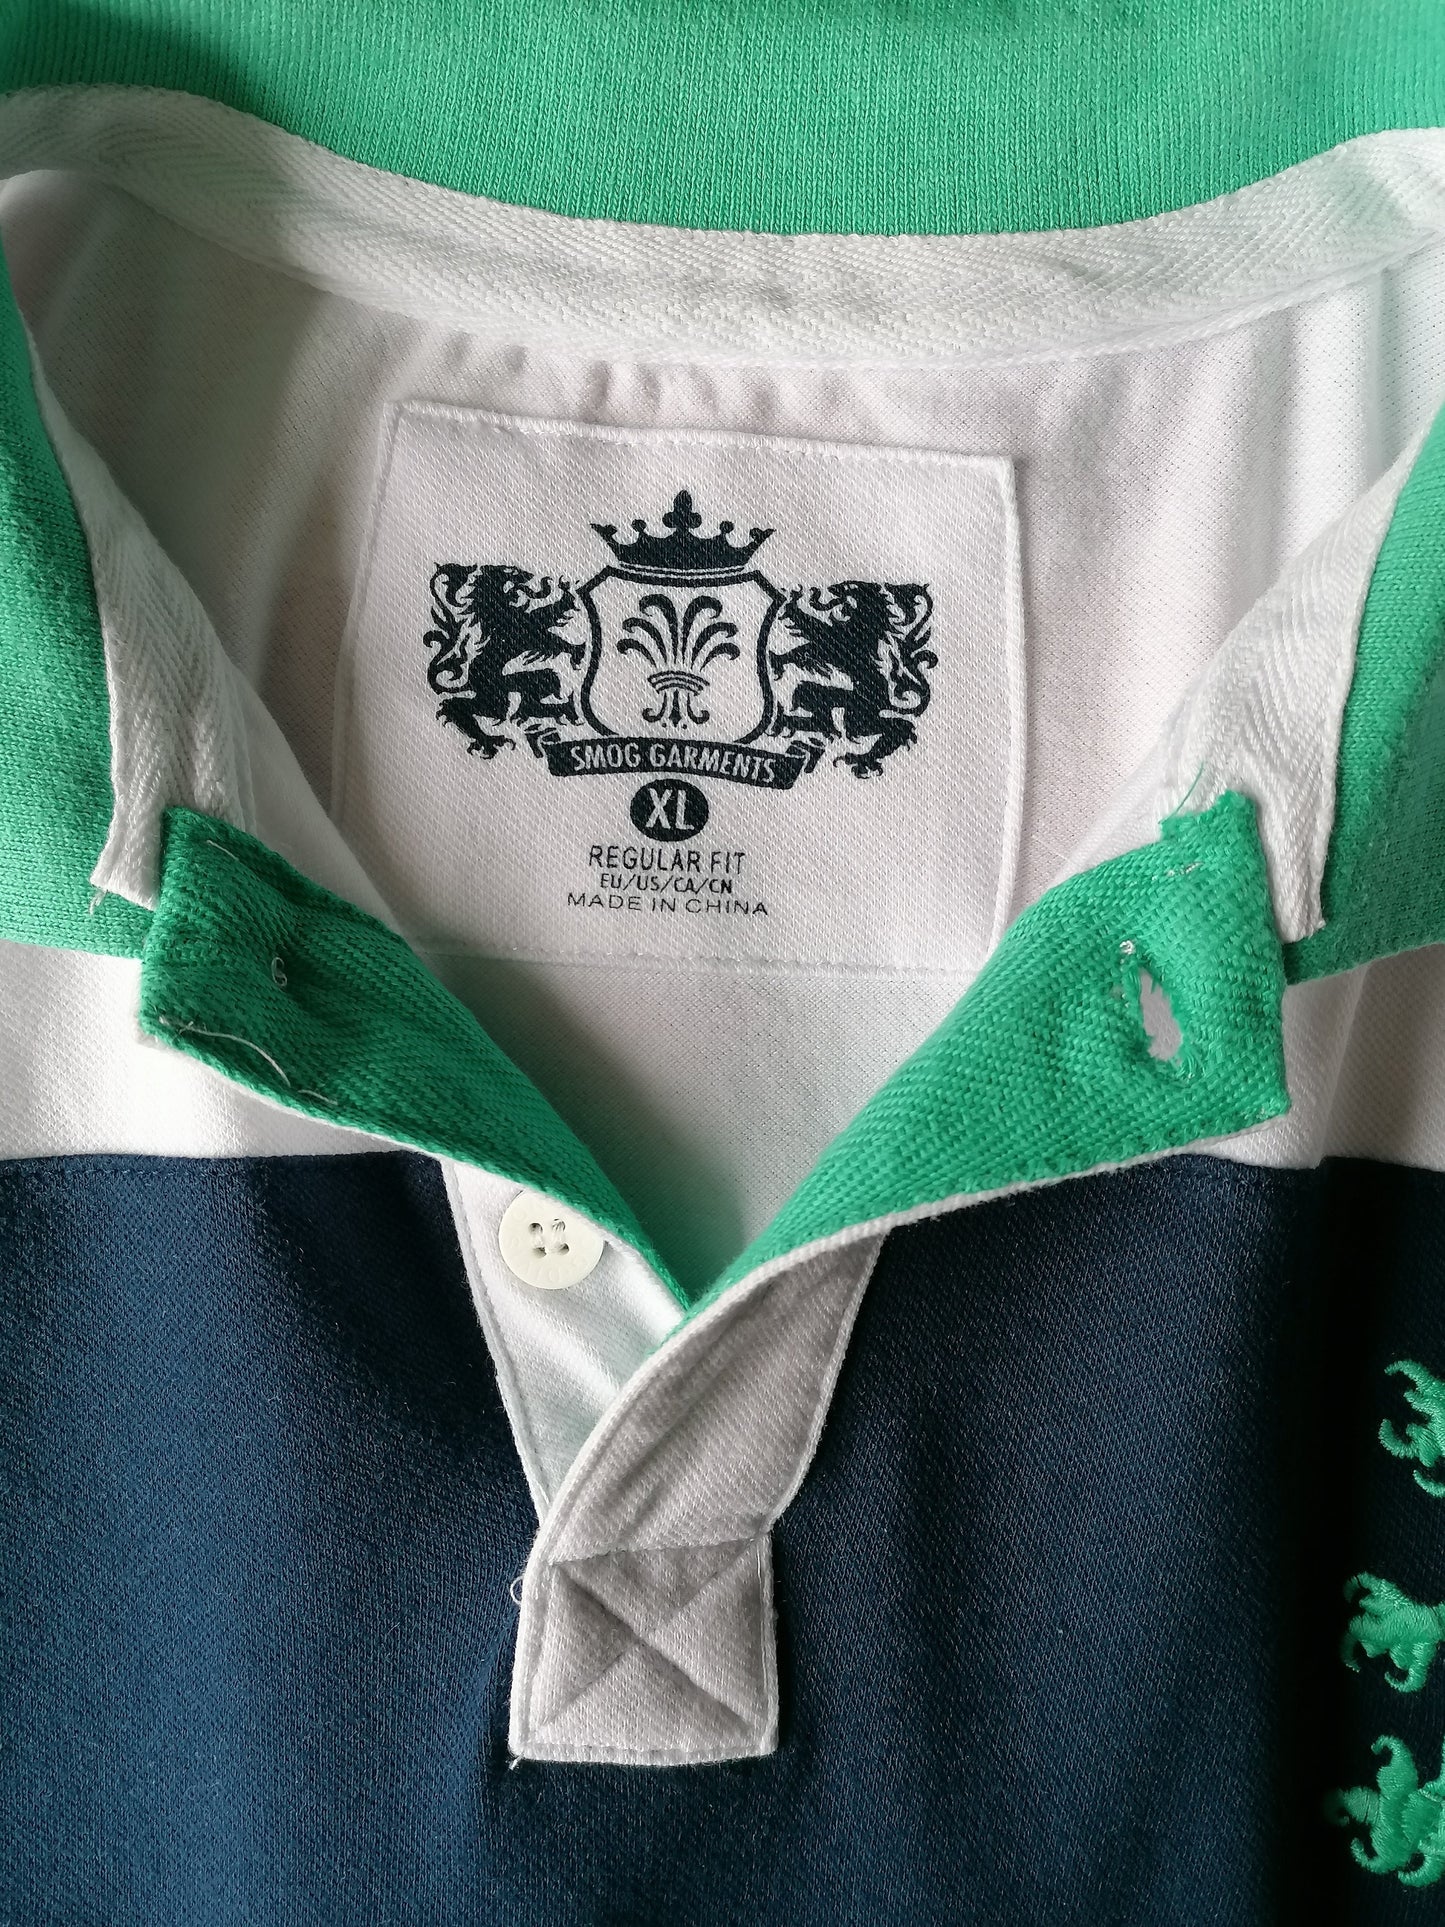 Smog Polo. Blue white colored green. Size XL. Regular fit.